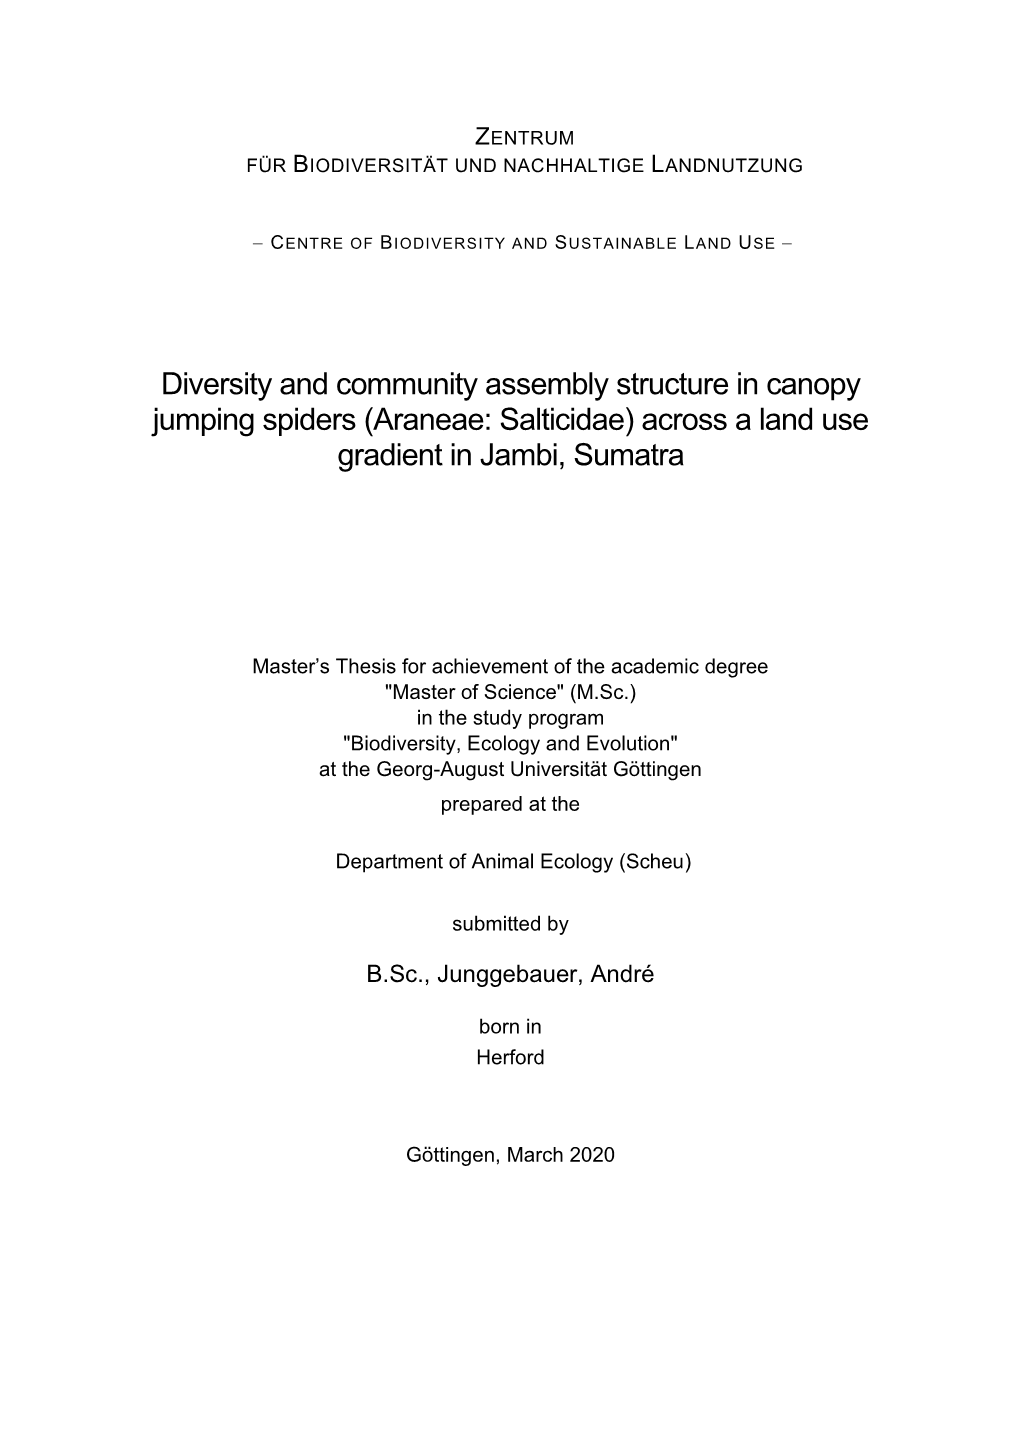 Diversity and Community Assembly Structure in Canopy Jumping Spiders (Araneae: Salticidae) Across a Land Use Gradient in Jambi, Sumatra